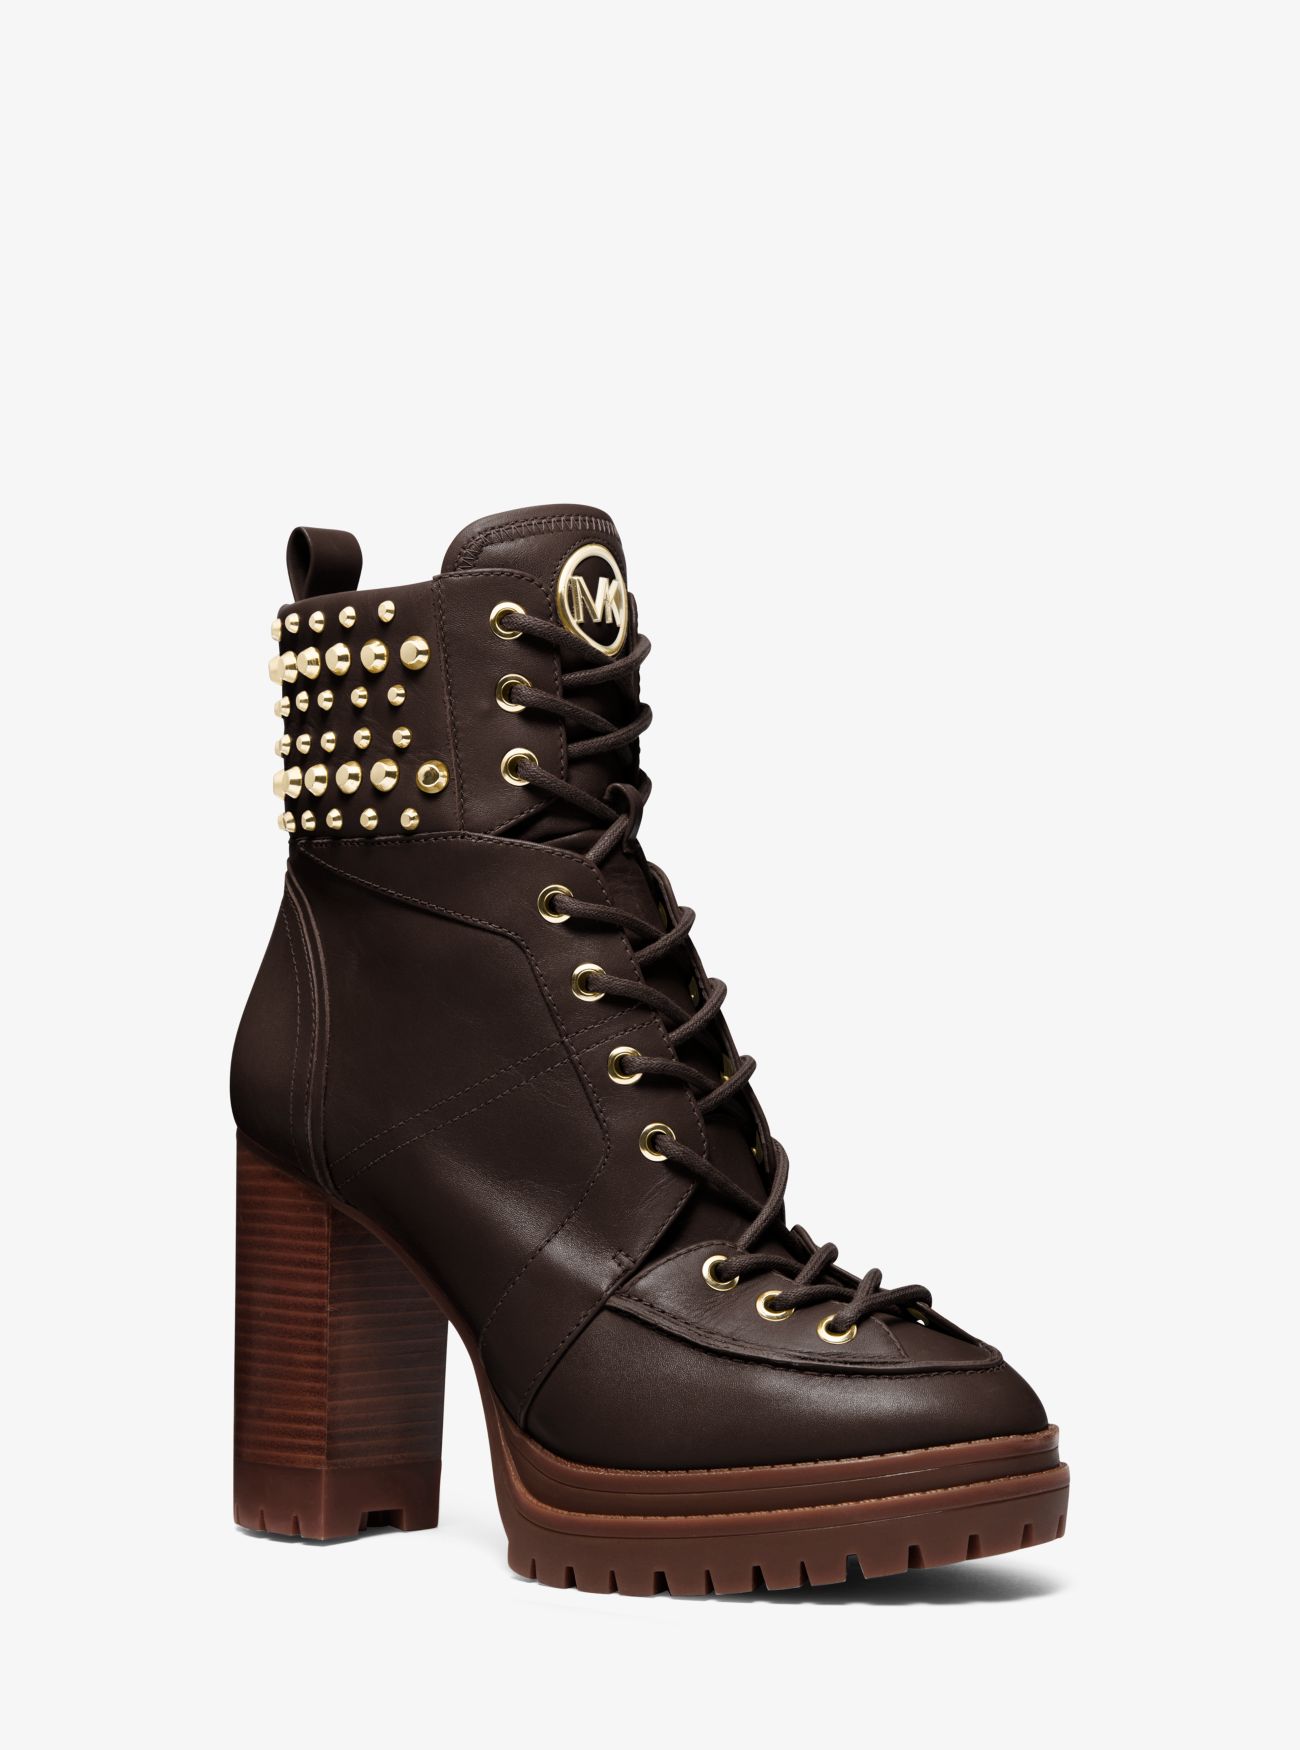 MK Yvonne Studded Leather Boot - Brown - Michael Kors